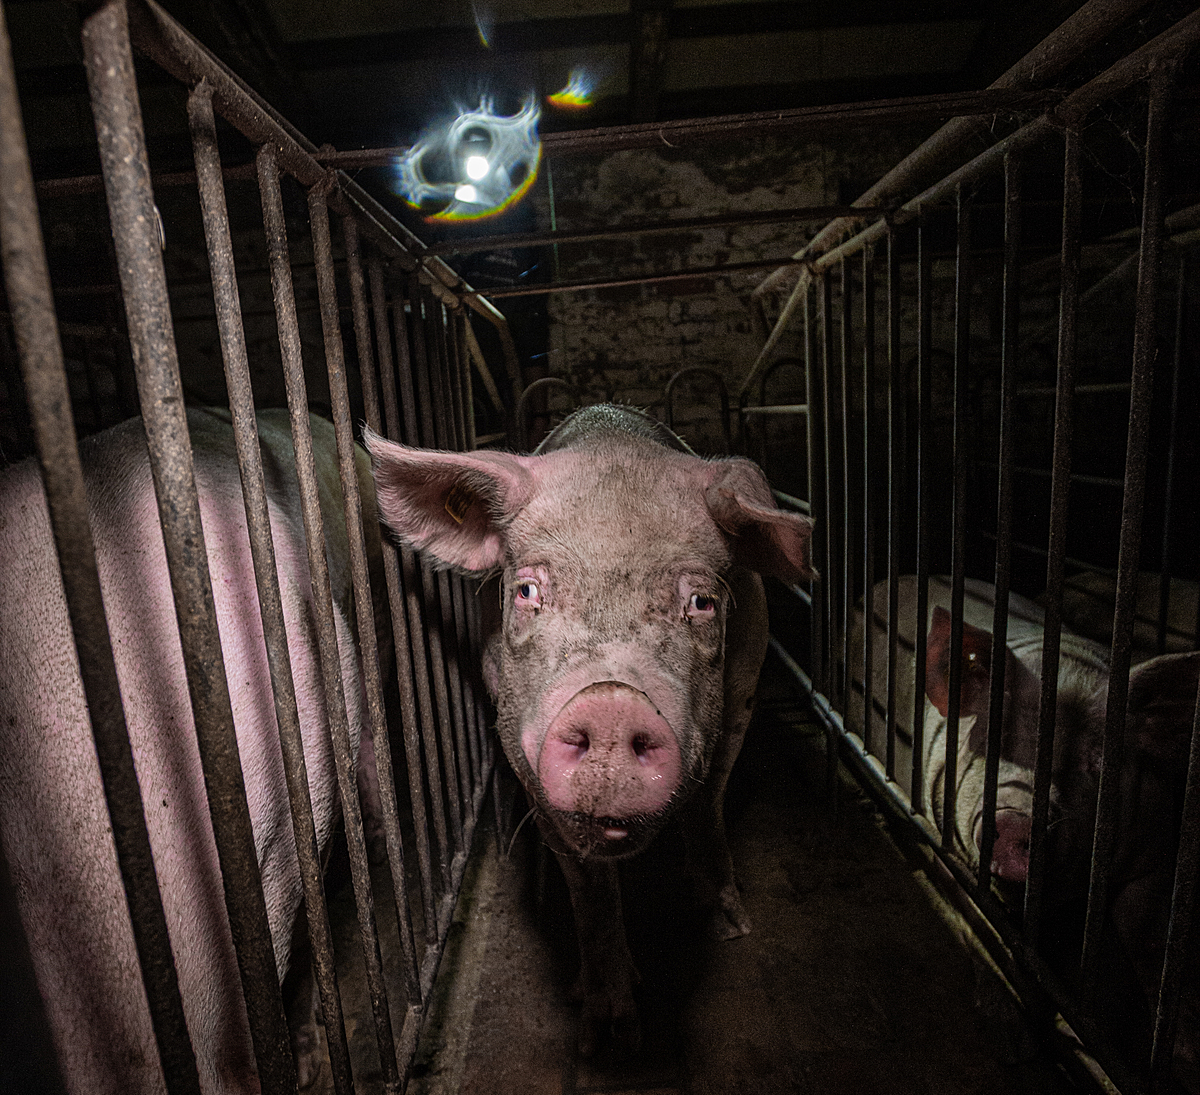 A pregnant sow stands on a floor slick with feces and urine in a cage in which she cannot turn around. This industrial farm in northern Italy housed thousands of pigs in this condition.